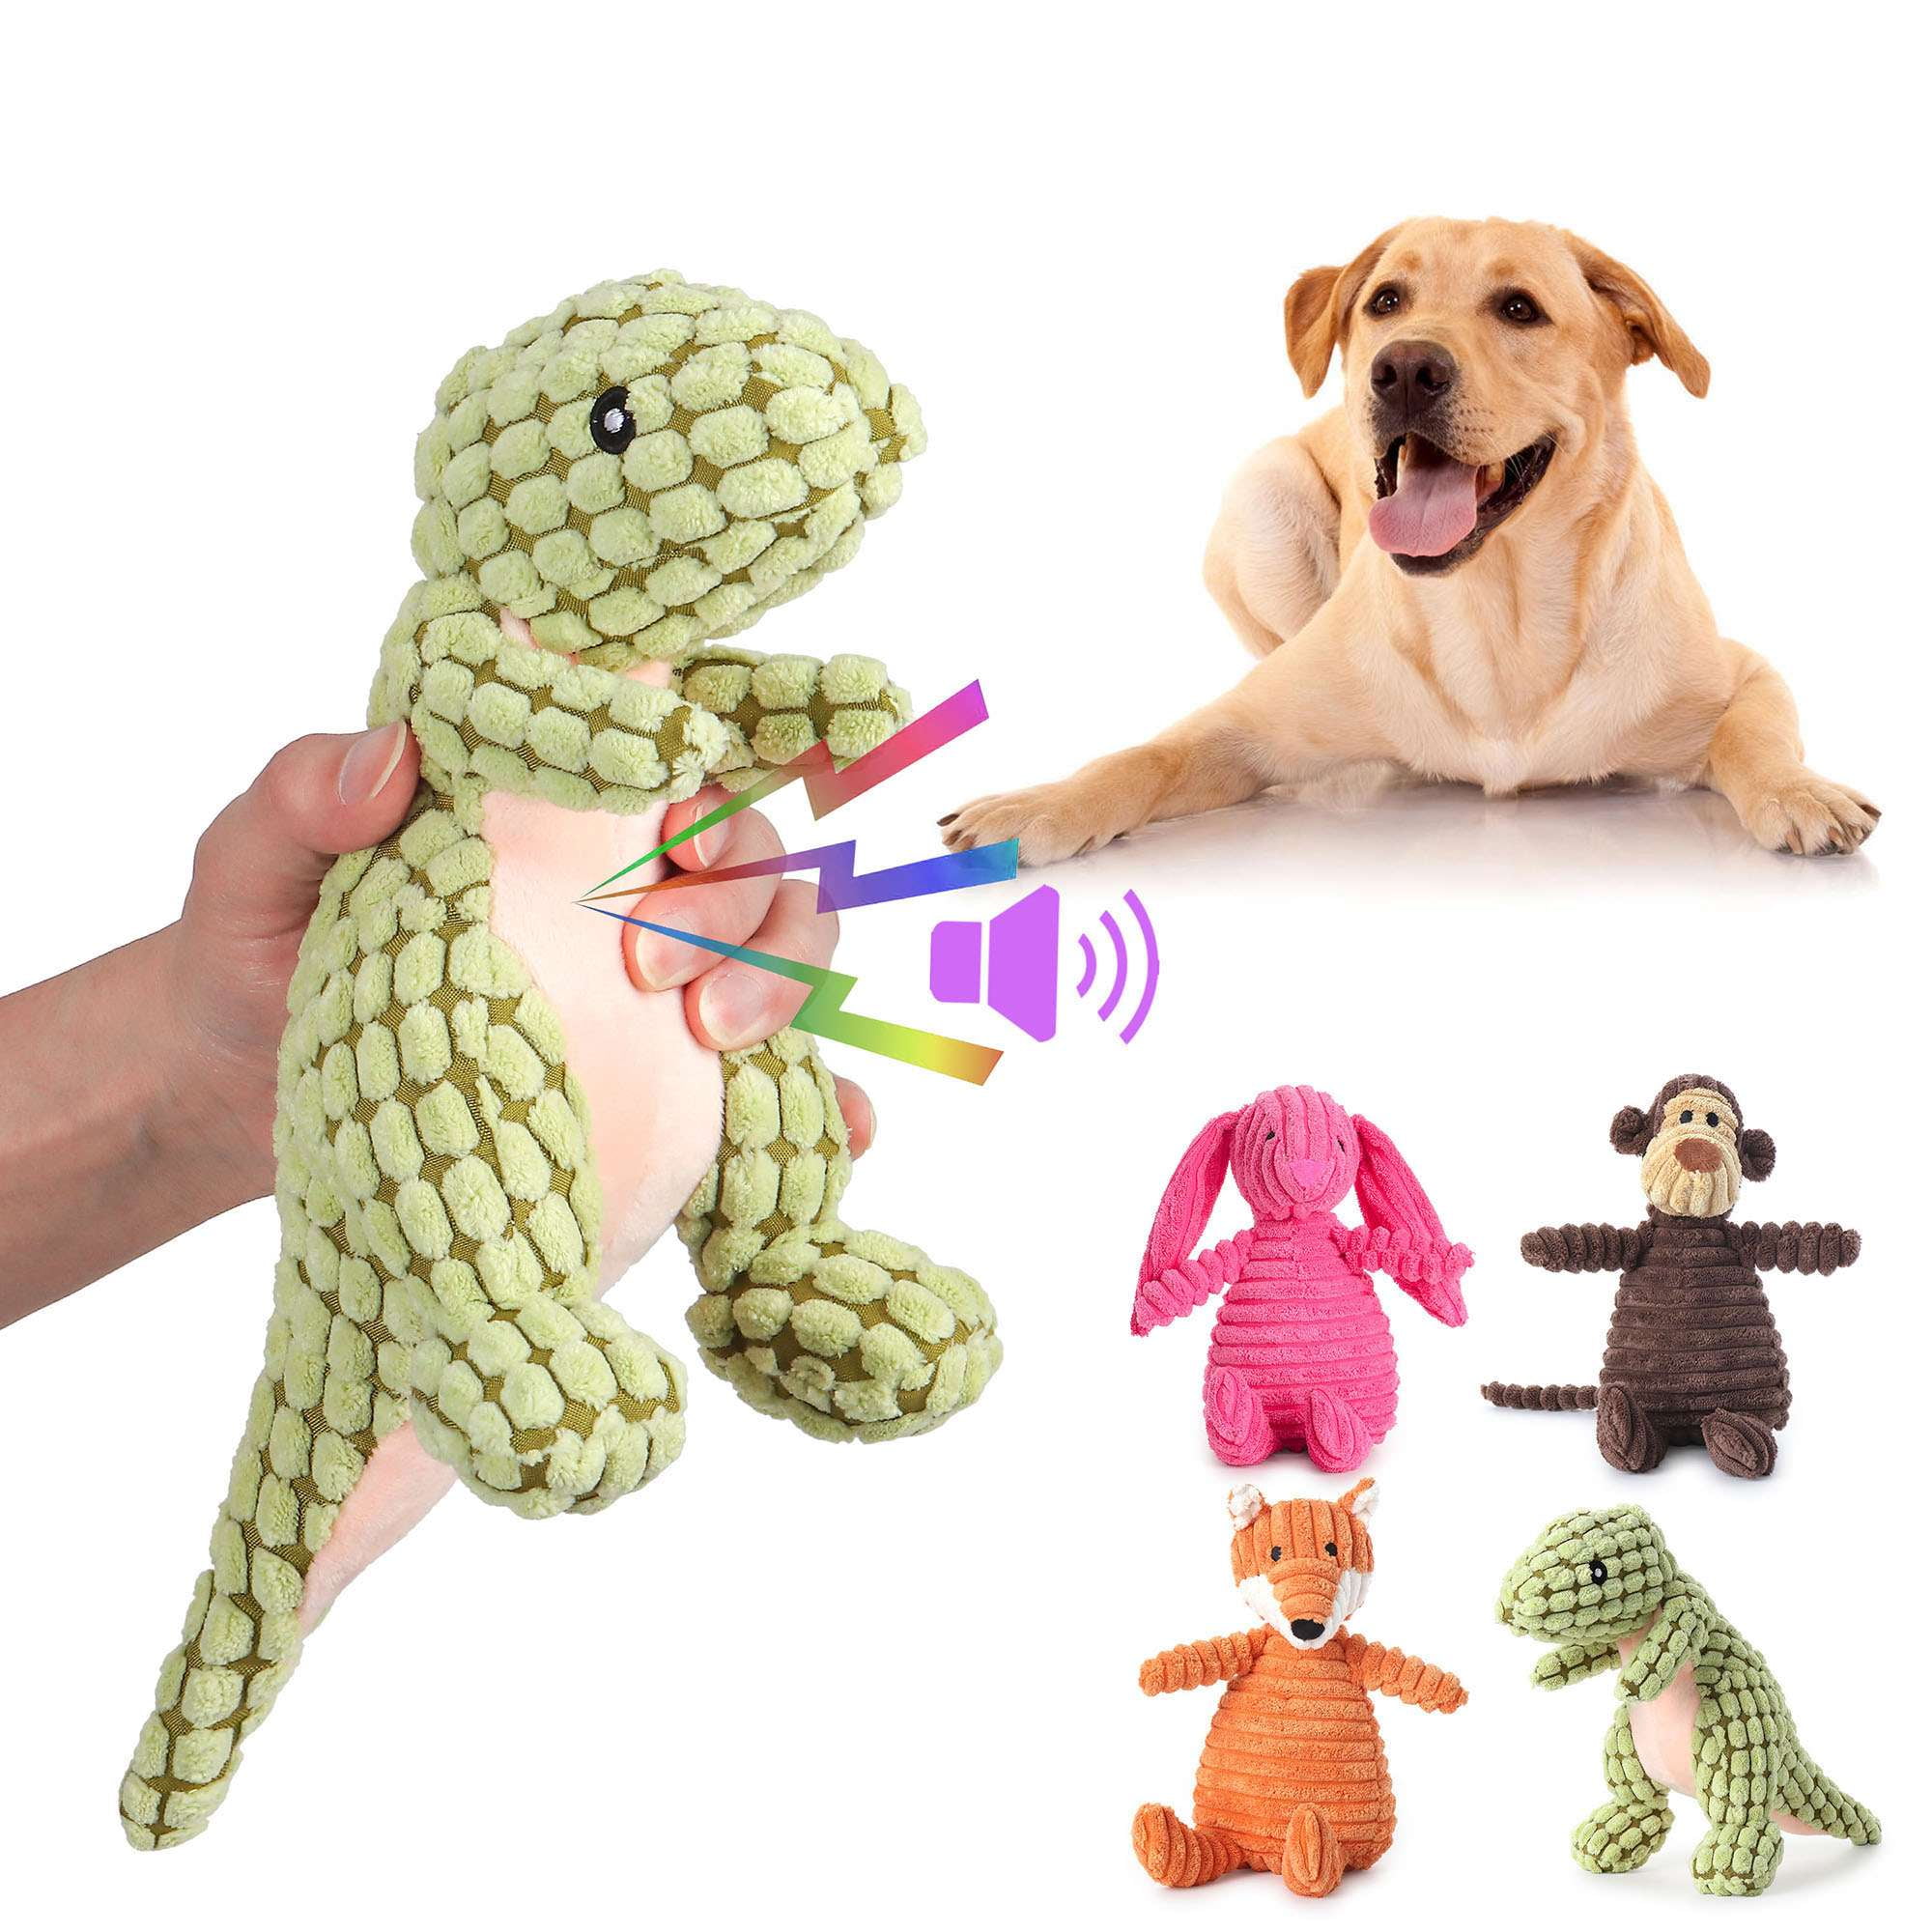 EHEYCIGA Dog Toys for Small Dogs, Small Squeaky Pet Toys for Puppies Small  Breed Entertainment, Stuffed Plush Cute Medium Dog Toys with Squeaker